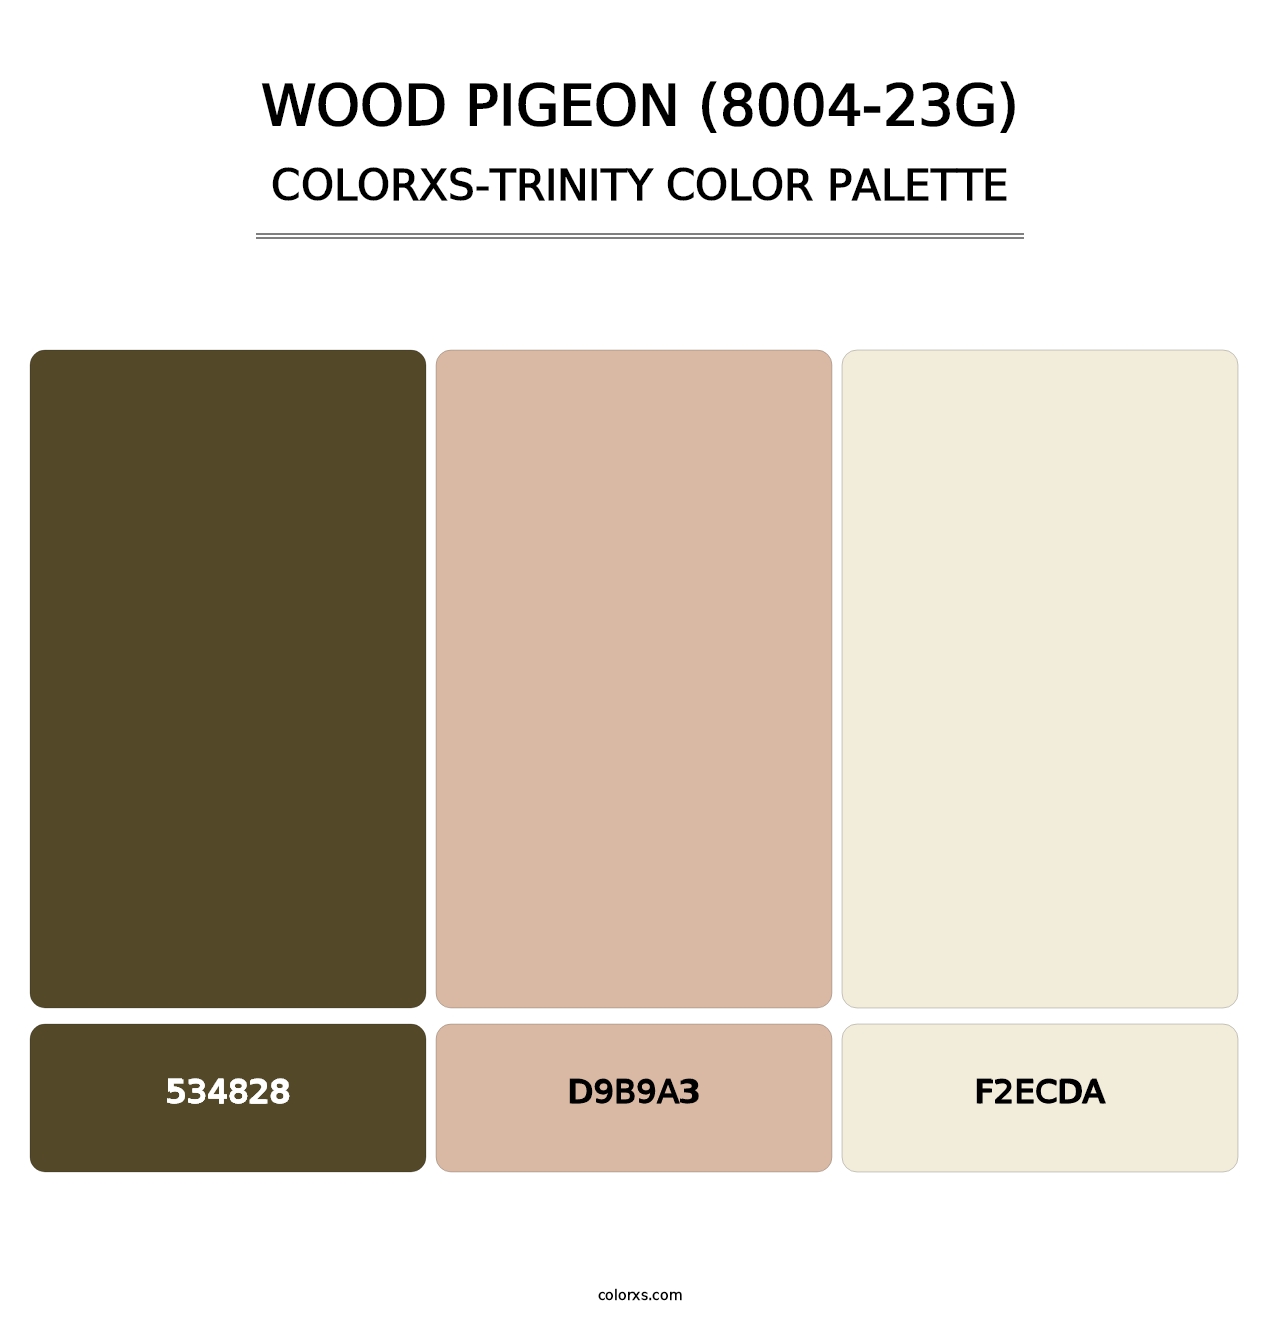 Wood Pigeon (8004-23G) - Colorxs Trinity Palette